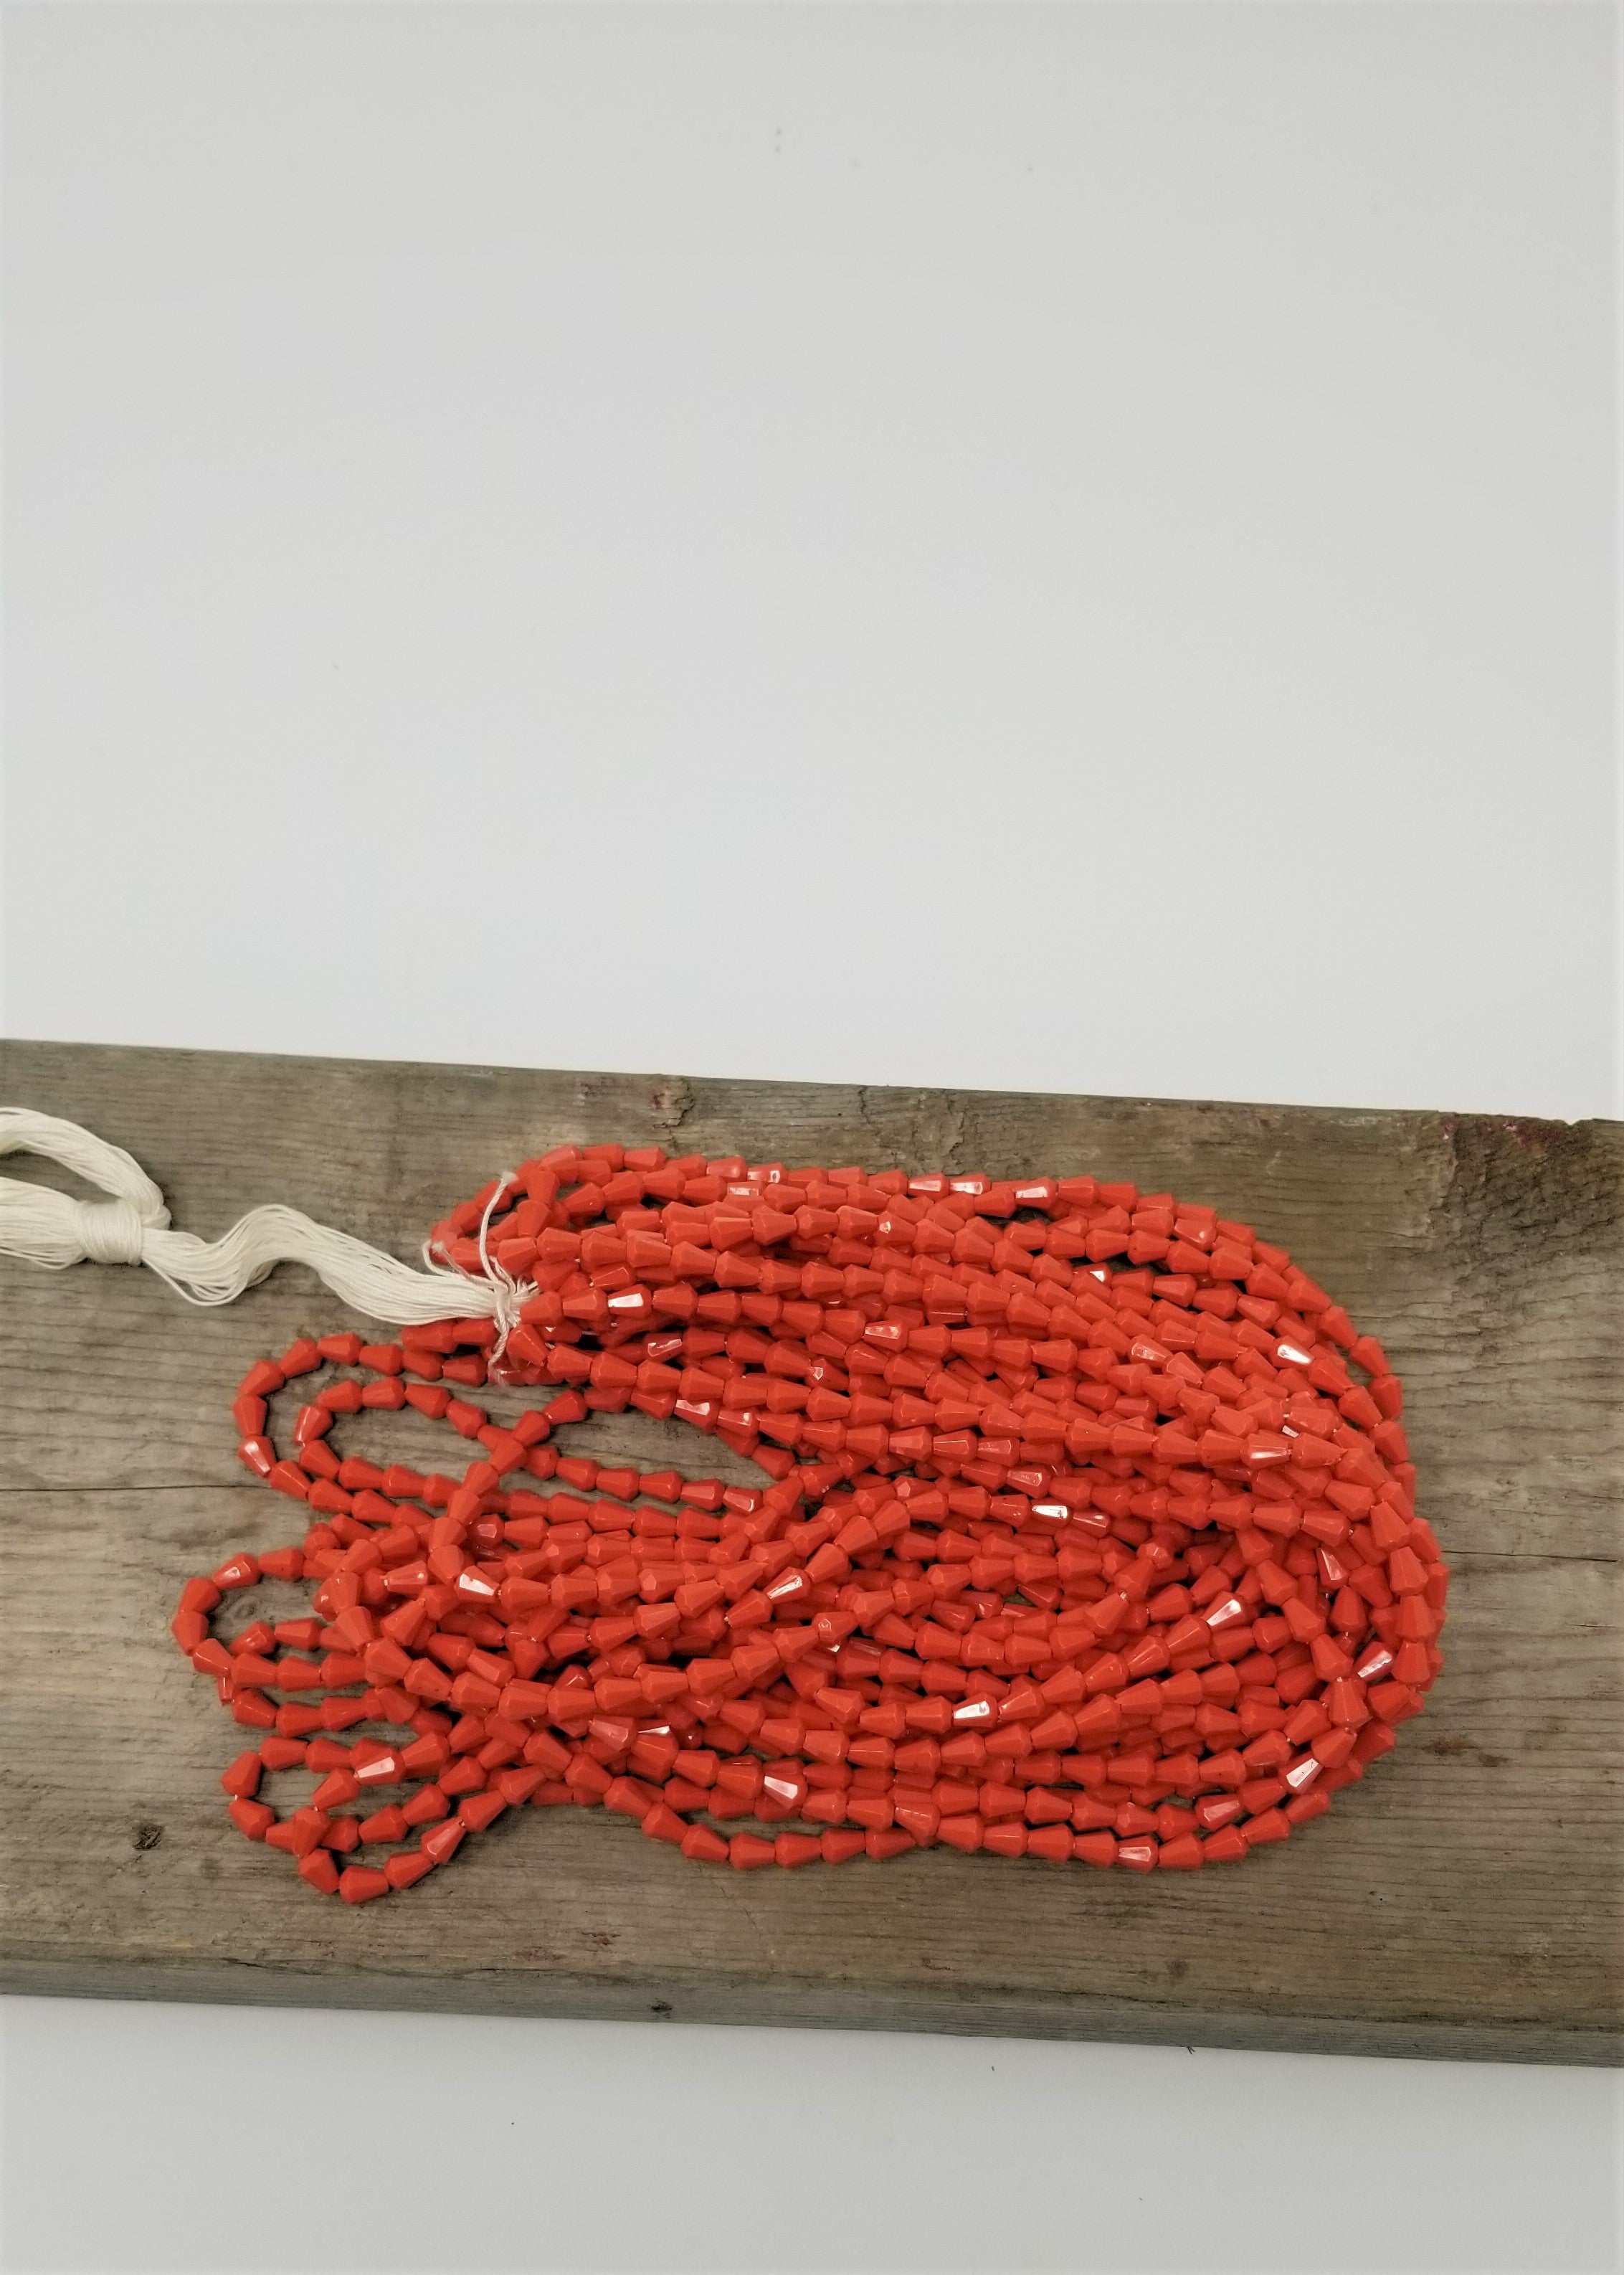 1200 Vintage Lucite Beads Orange-Red Bell Shape Faceted